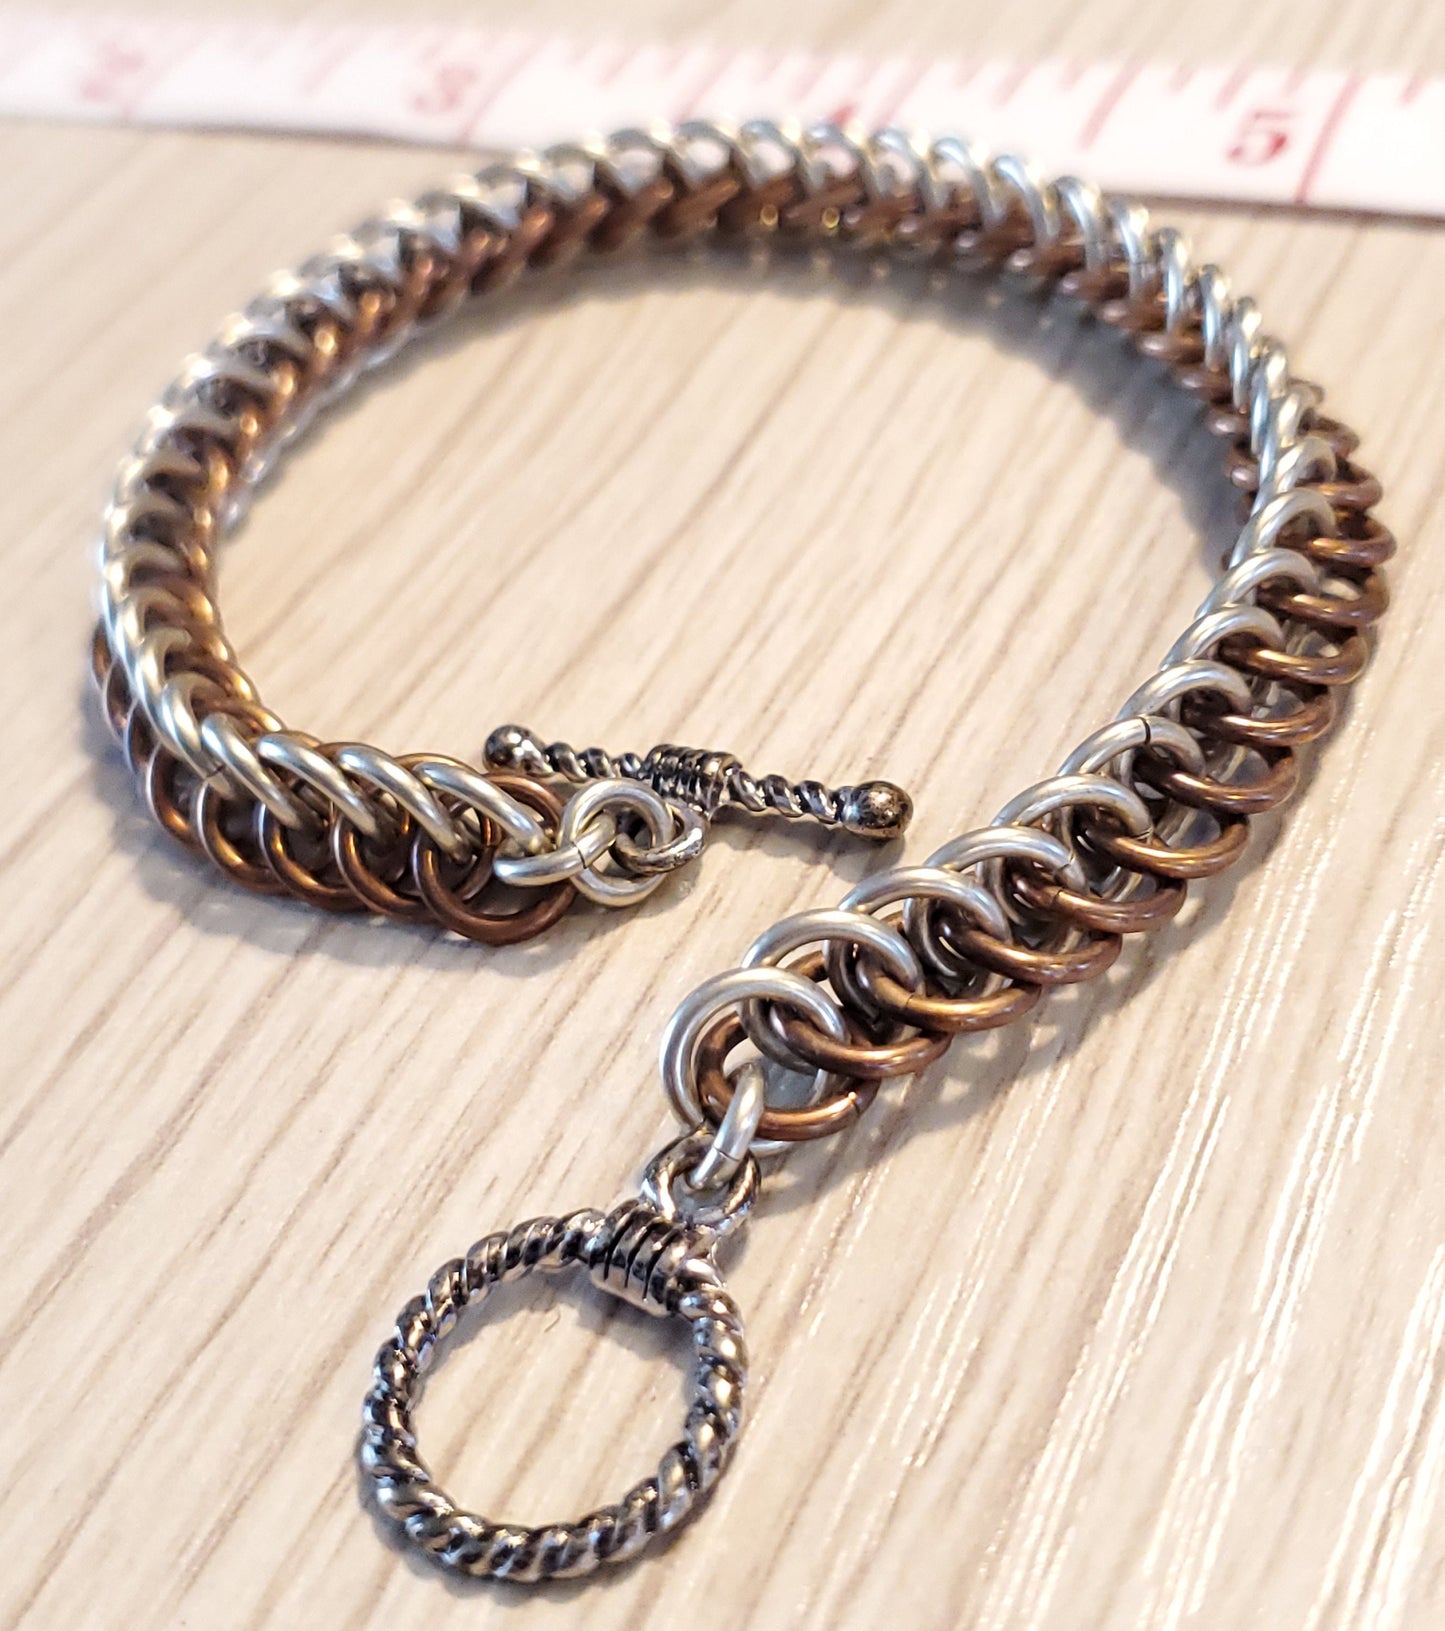 Copper and Aluminum Half Persian Bracelet with Toggle Clasp